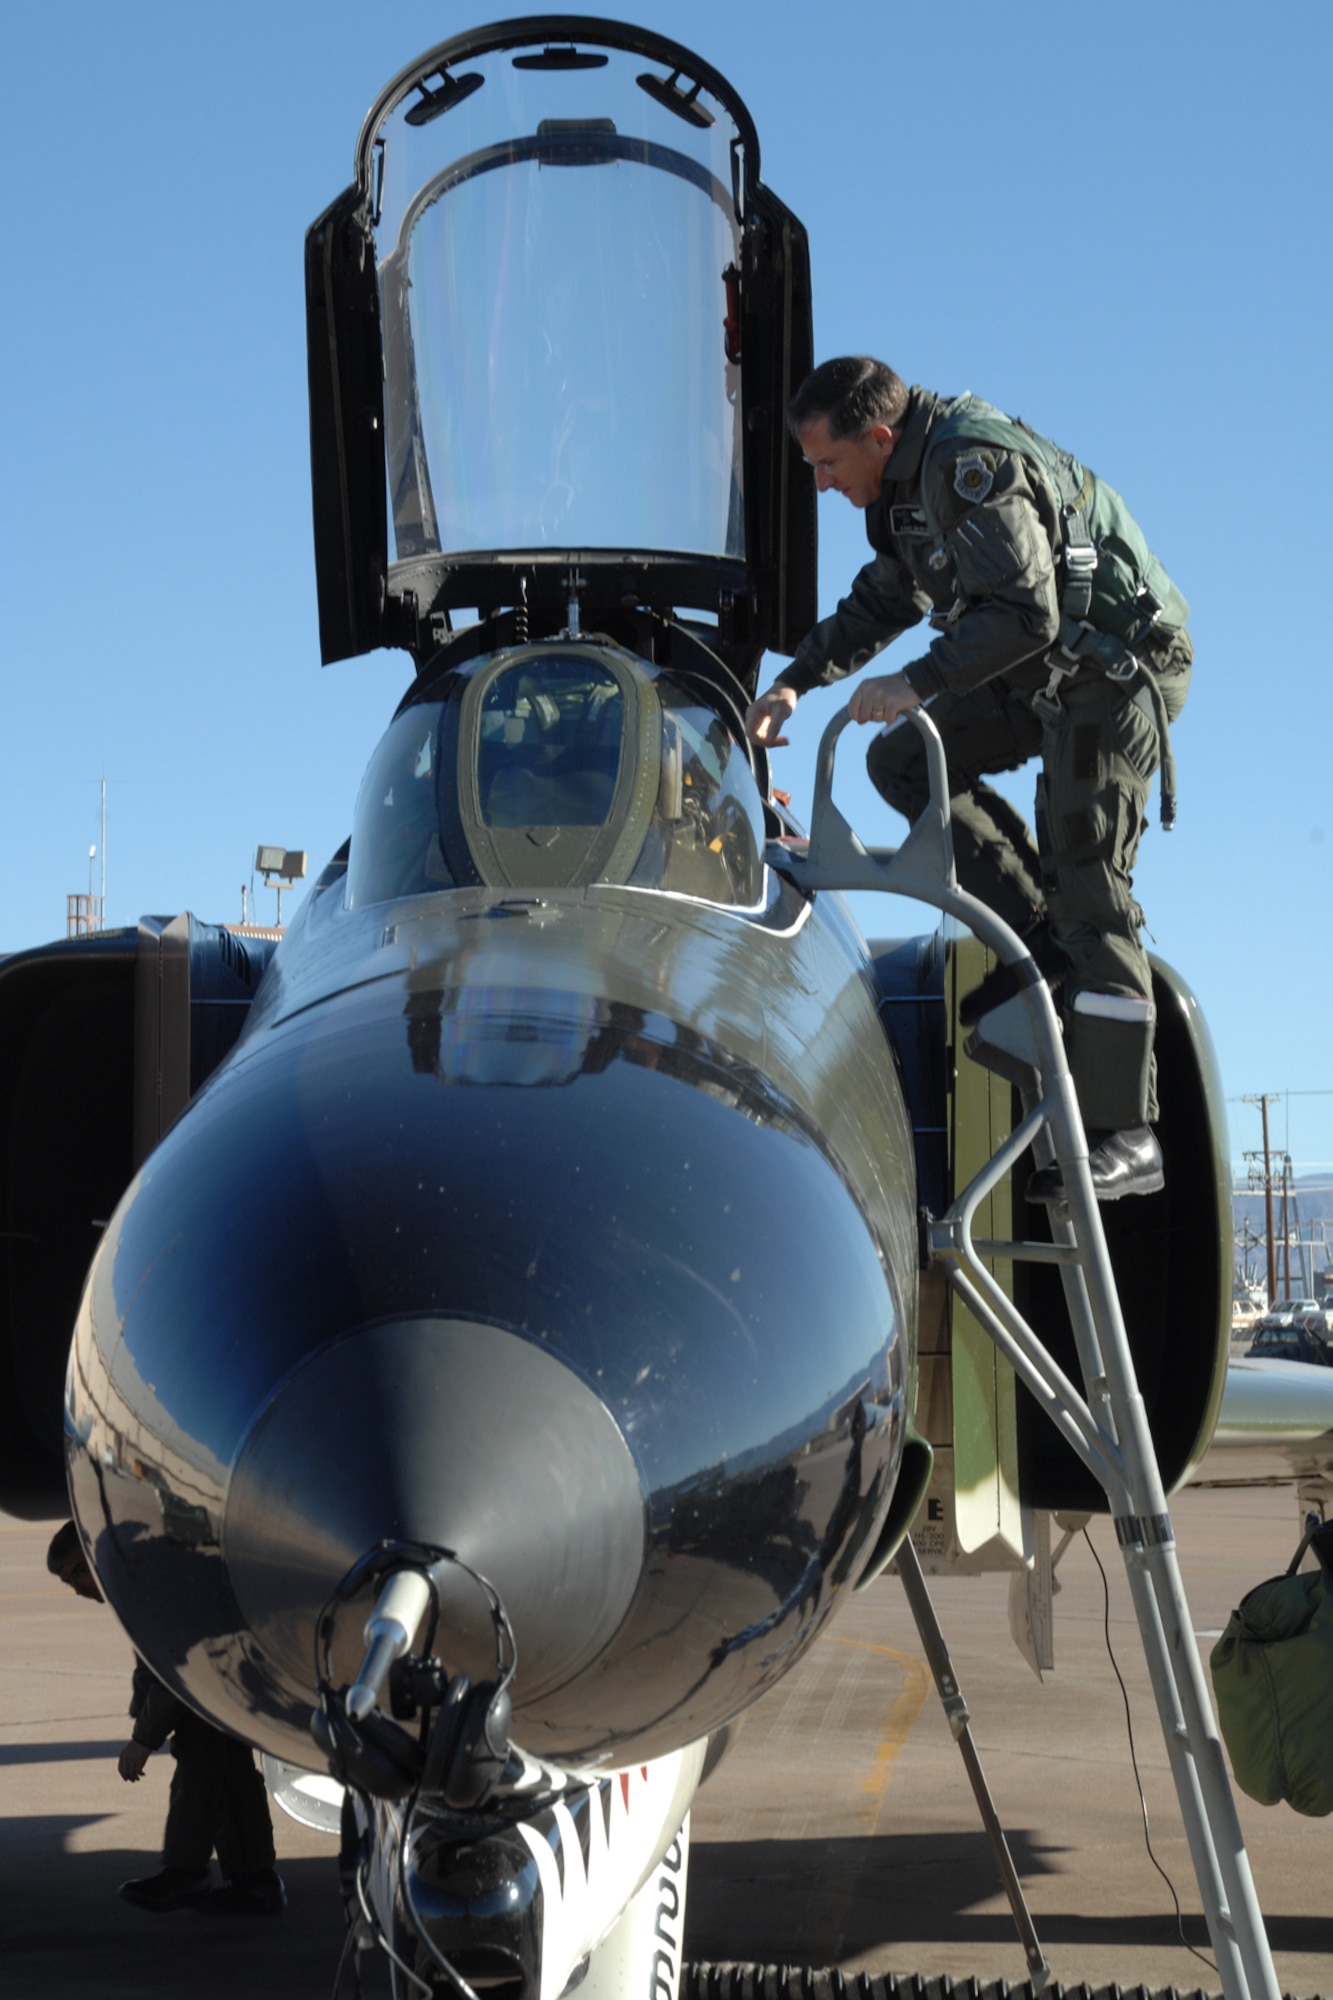 Brig. Gen. David Goldfein, 49th Fighter Wing commander, boards a F-4 Phantom Dec. 20, 2007, at Holloman Air Force Base, N.M. This was Brig. Gen. Goldfein's first time flying the F-4 and it served as a special occassion for him since his father, Bill Goldfein, flew the Phantom in Vietnam. (U.S. Air Force photo/Airman 1st Class Jamal D. Sutter)